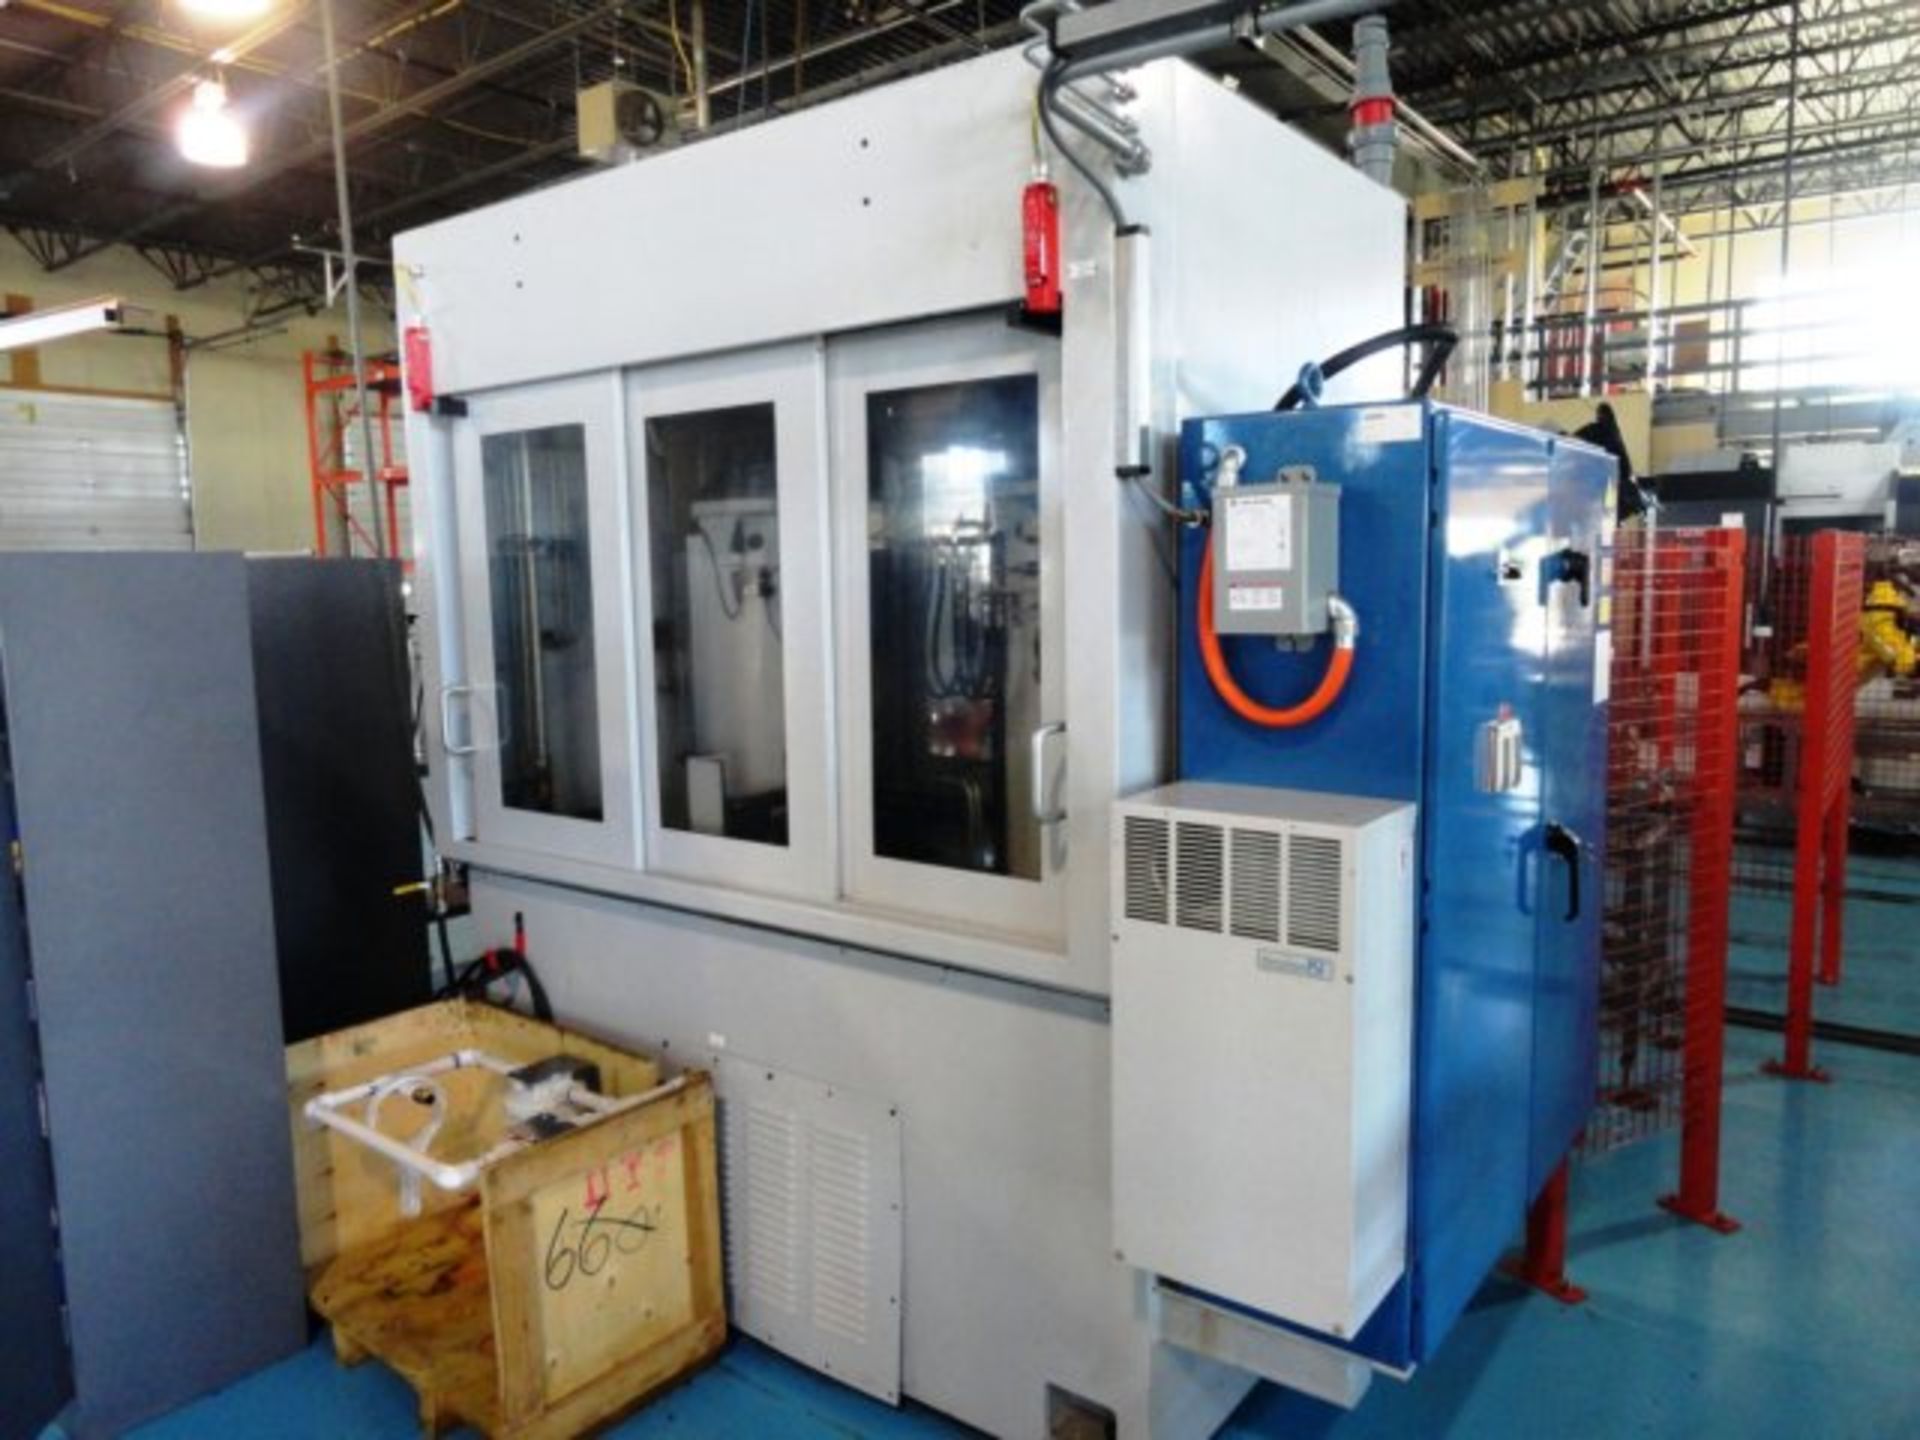 NAGEL MODEL ECO 40-2 CNC TWIN SPINDLE VERTICAL HONING MACHINE New 2012 - Image 2 of 7